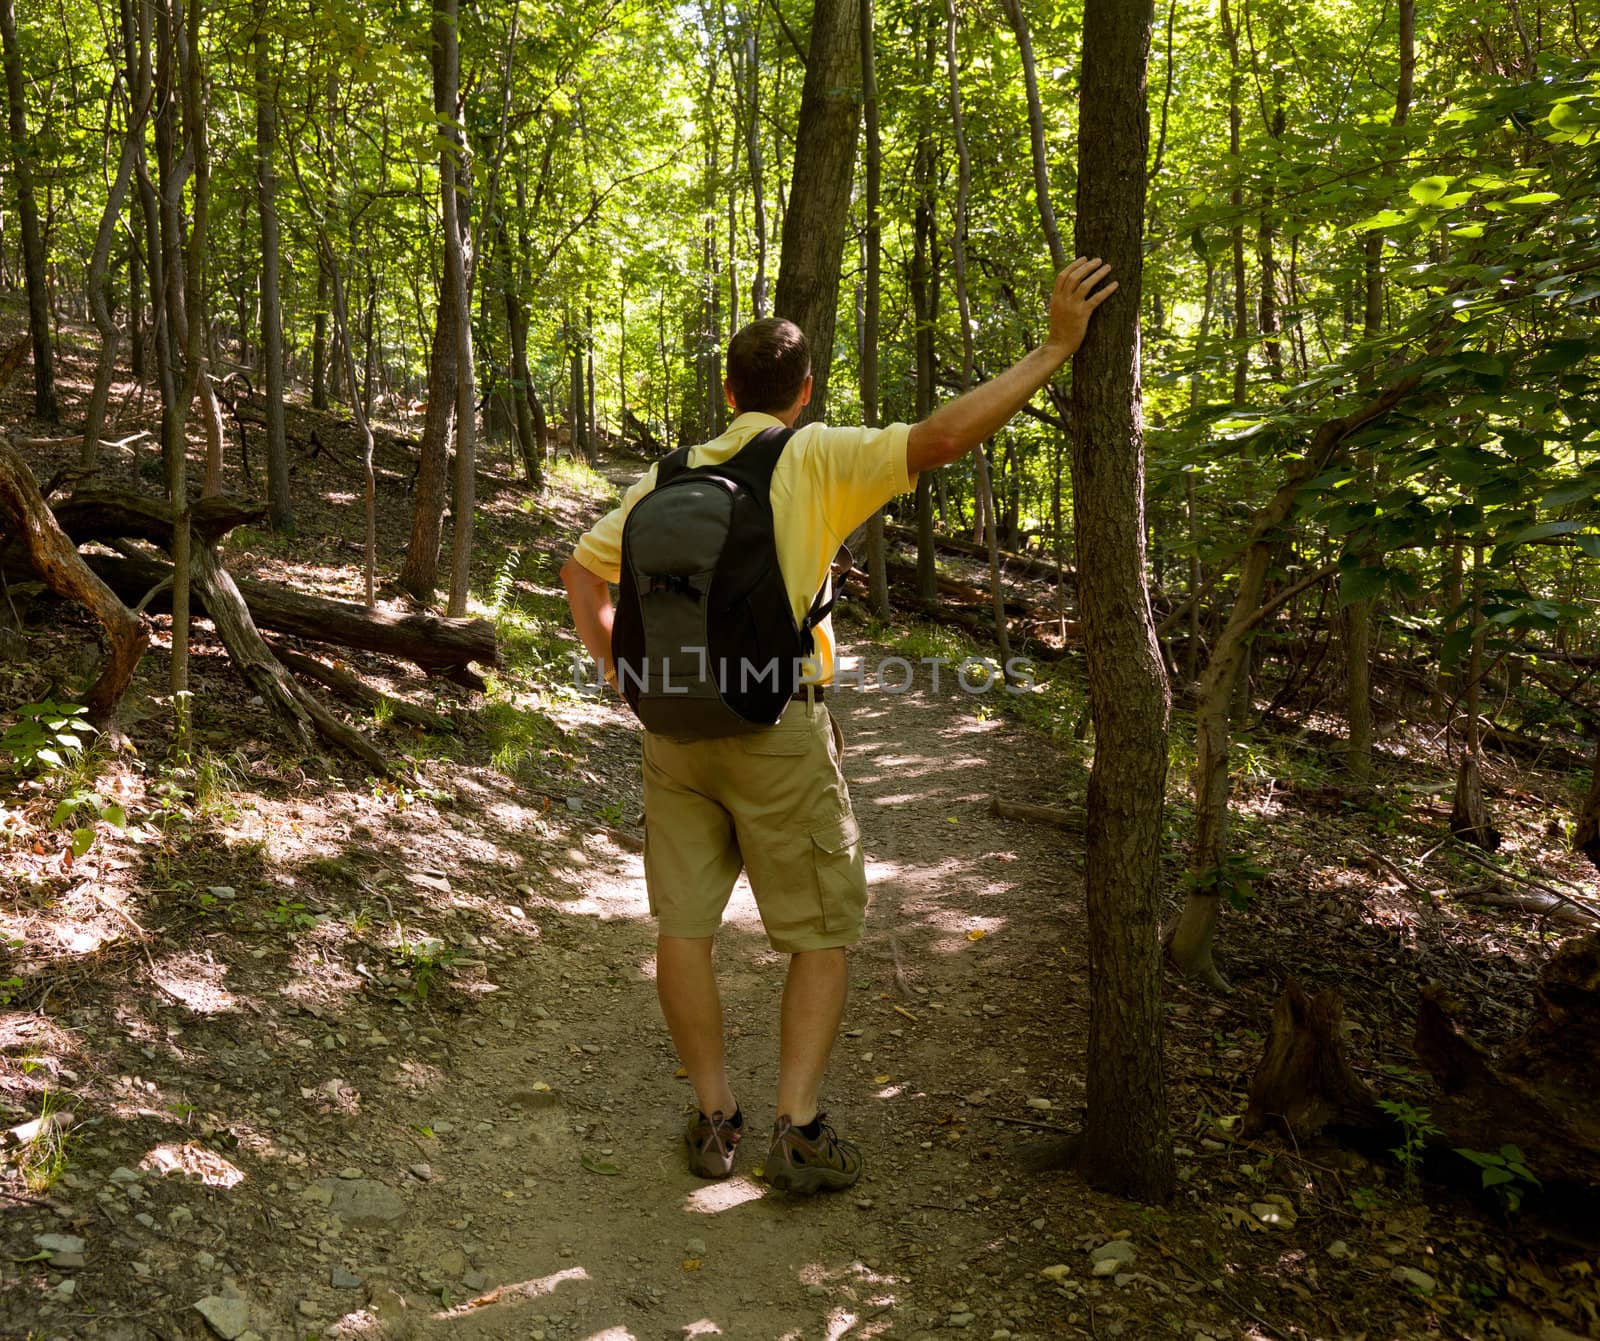 Senior male hiker overlooking the path through forest and leaning on a tree for a rest